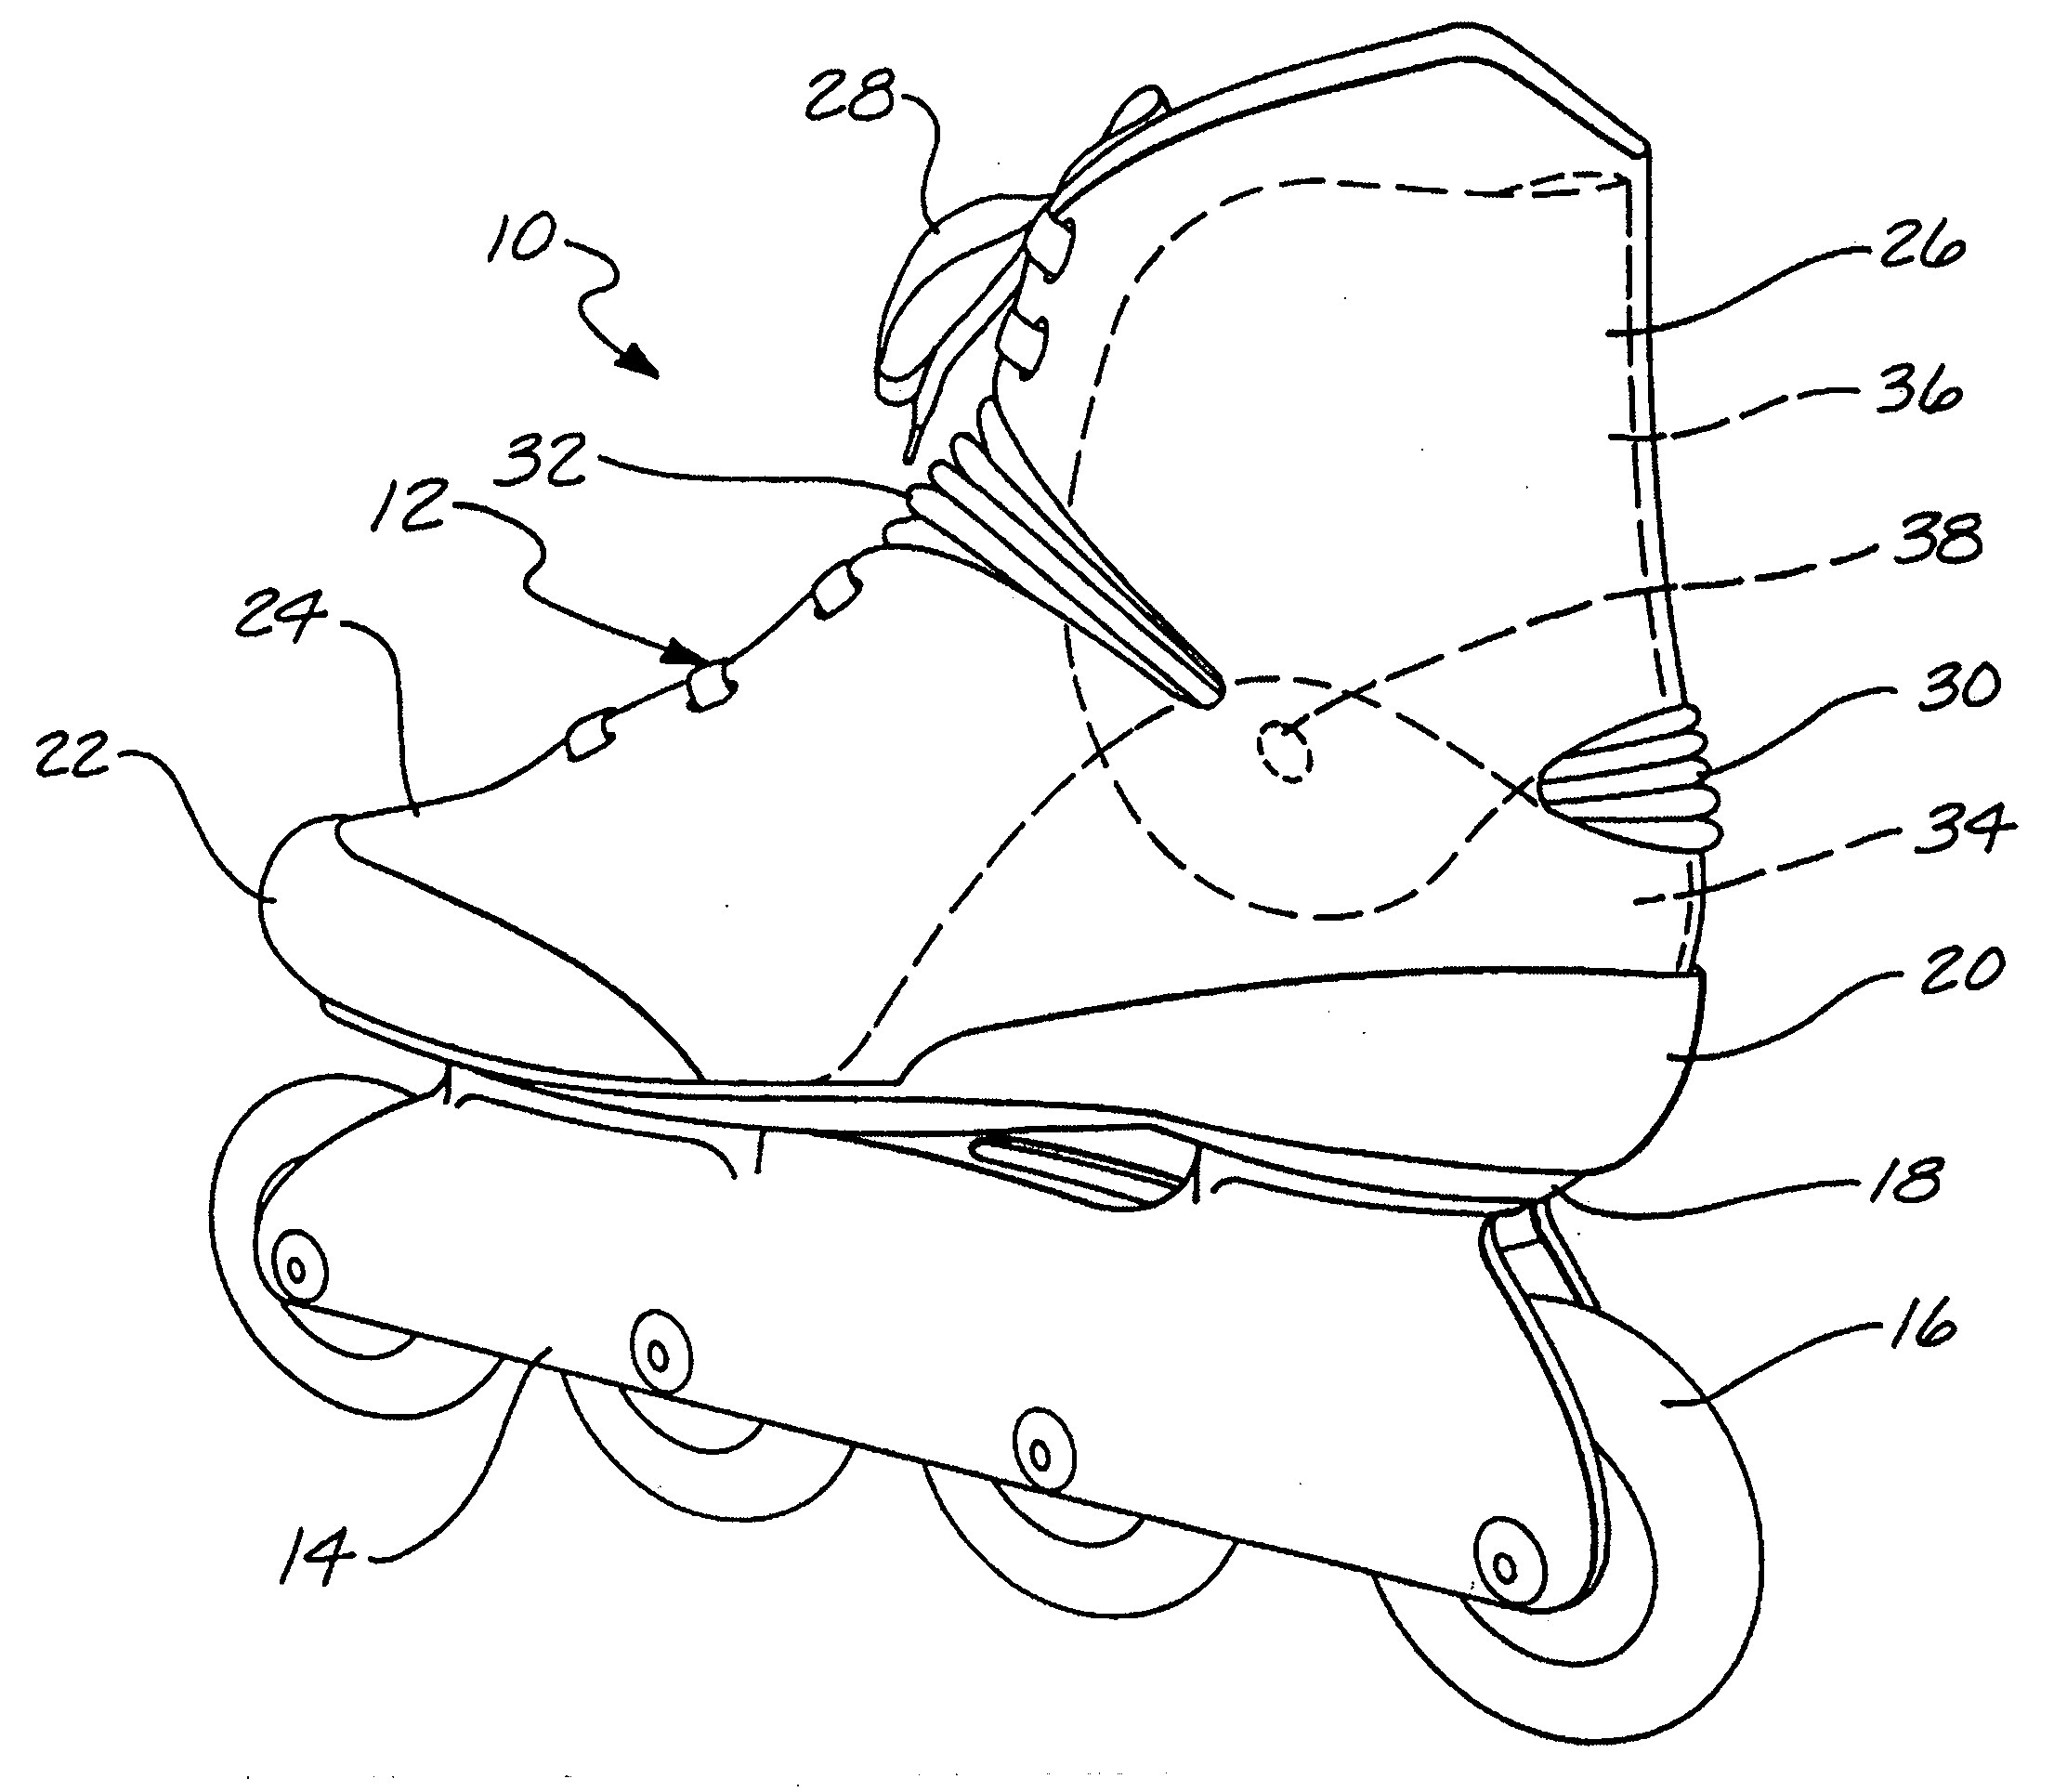 In-line roller skate with internal support and external ankle cuff